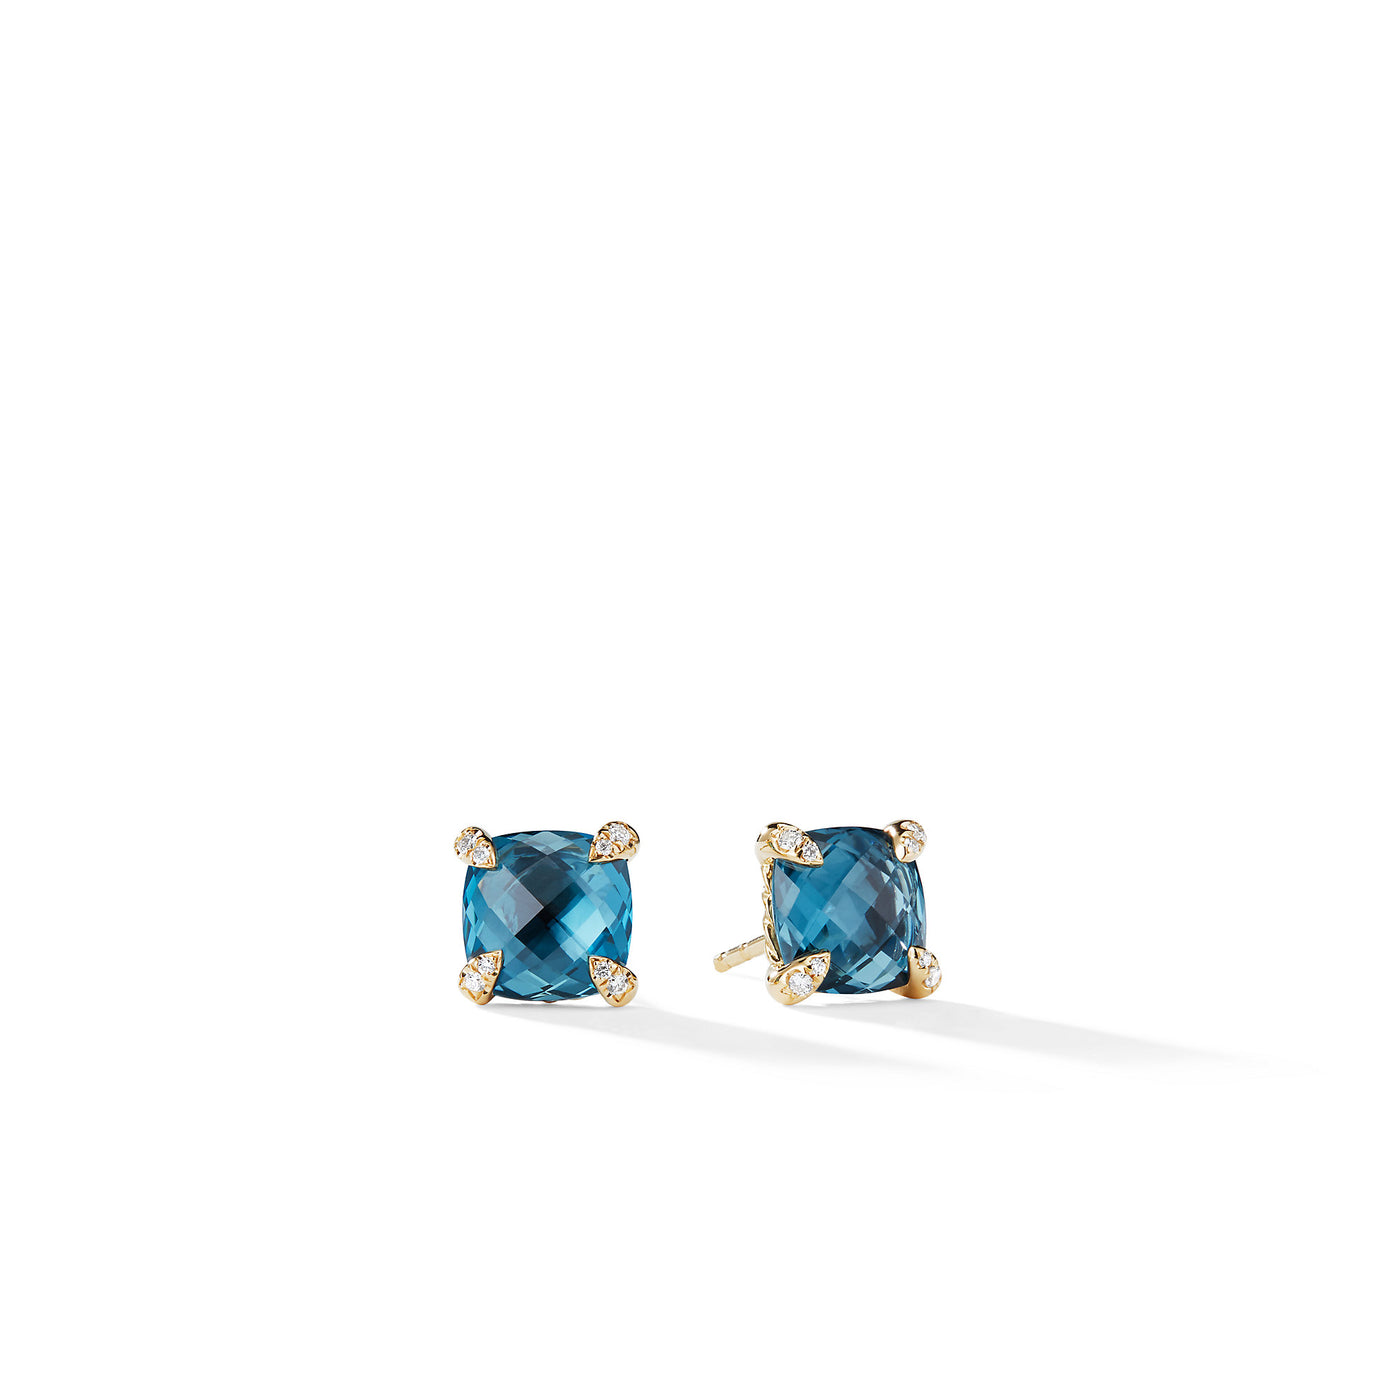 Chatelaine® Stud Earrings in 18K Yellow Gold with Hampton Blue Topaz and Diamonds\, 8mm